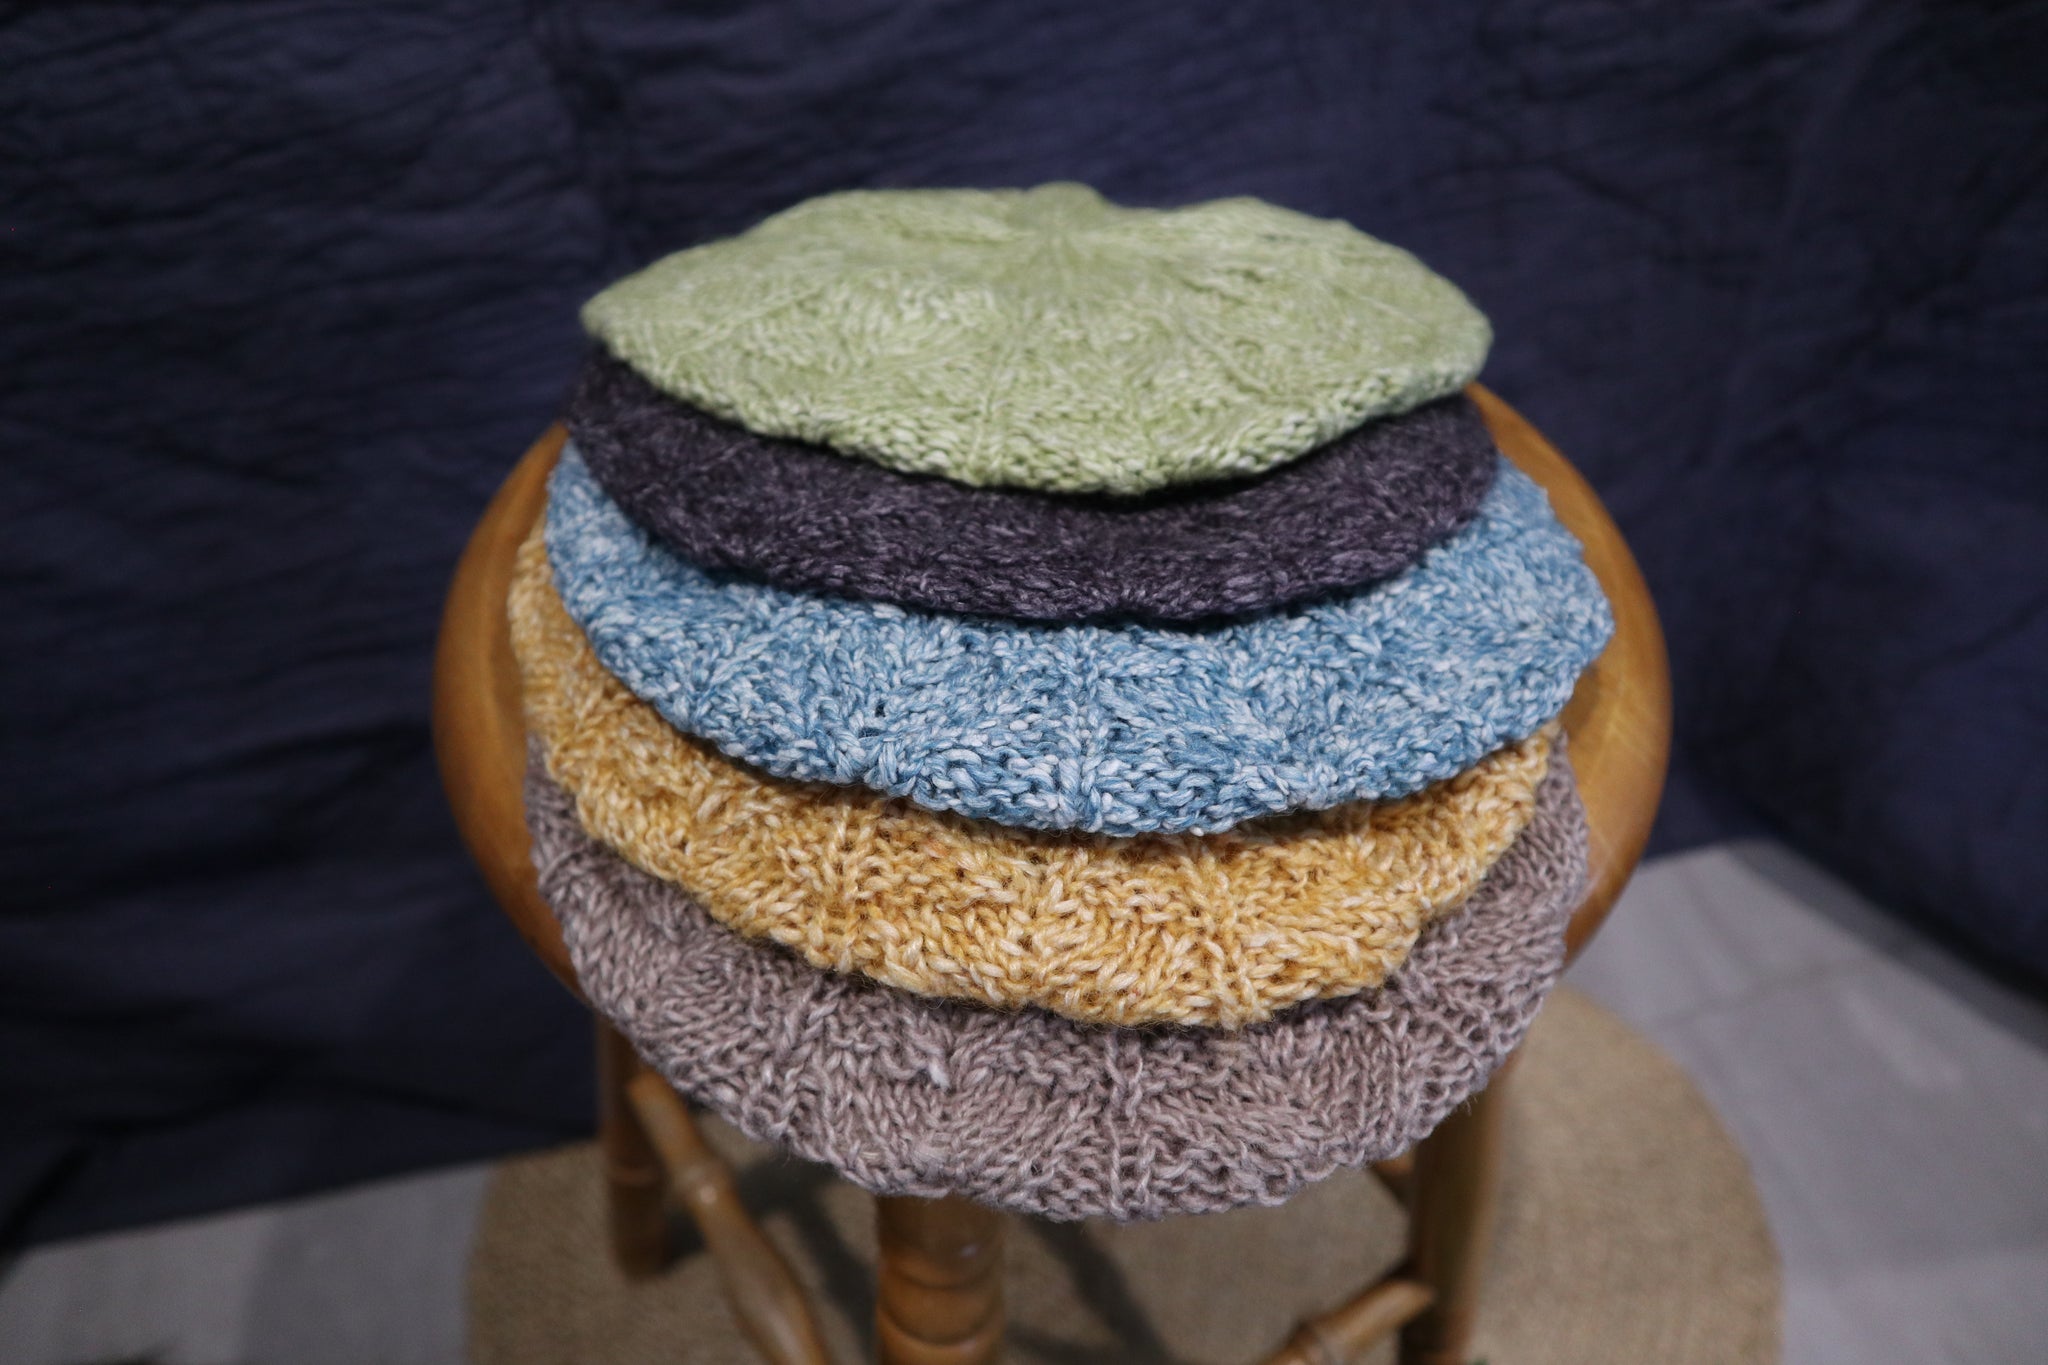 Fair Trade Ethical Fern Stitch Beret - Banana and Wool